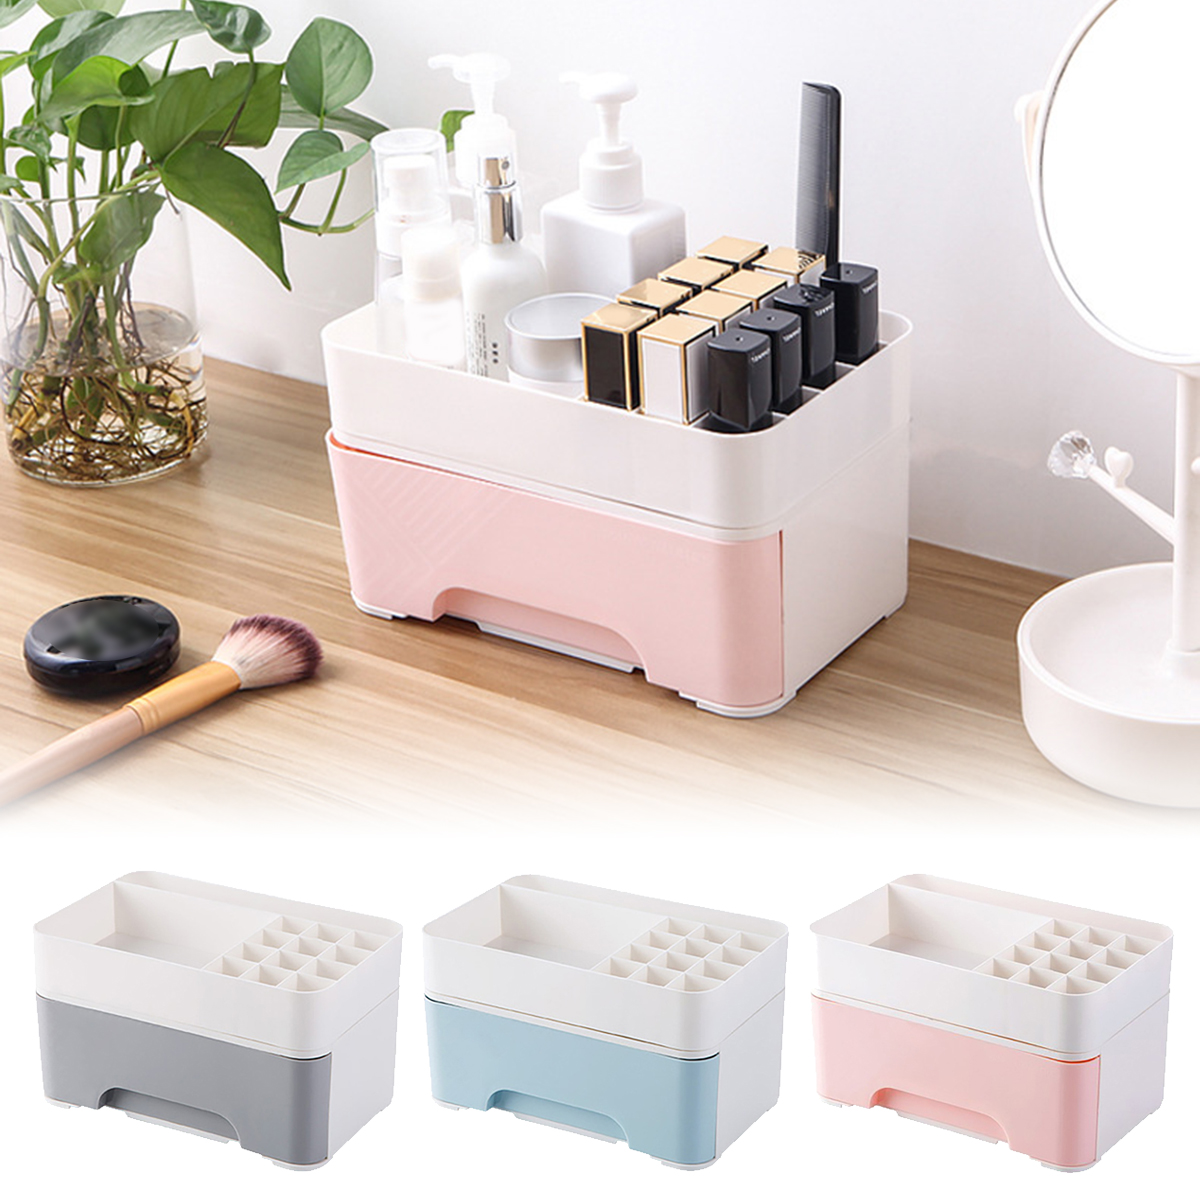 Desk-Skin-Care-Products-Storage-Box-Multi-functional-Lipstick-Cosmetic-Storage-Box-with-Drawer-Home--1763759-1